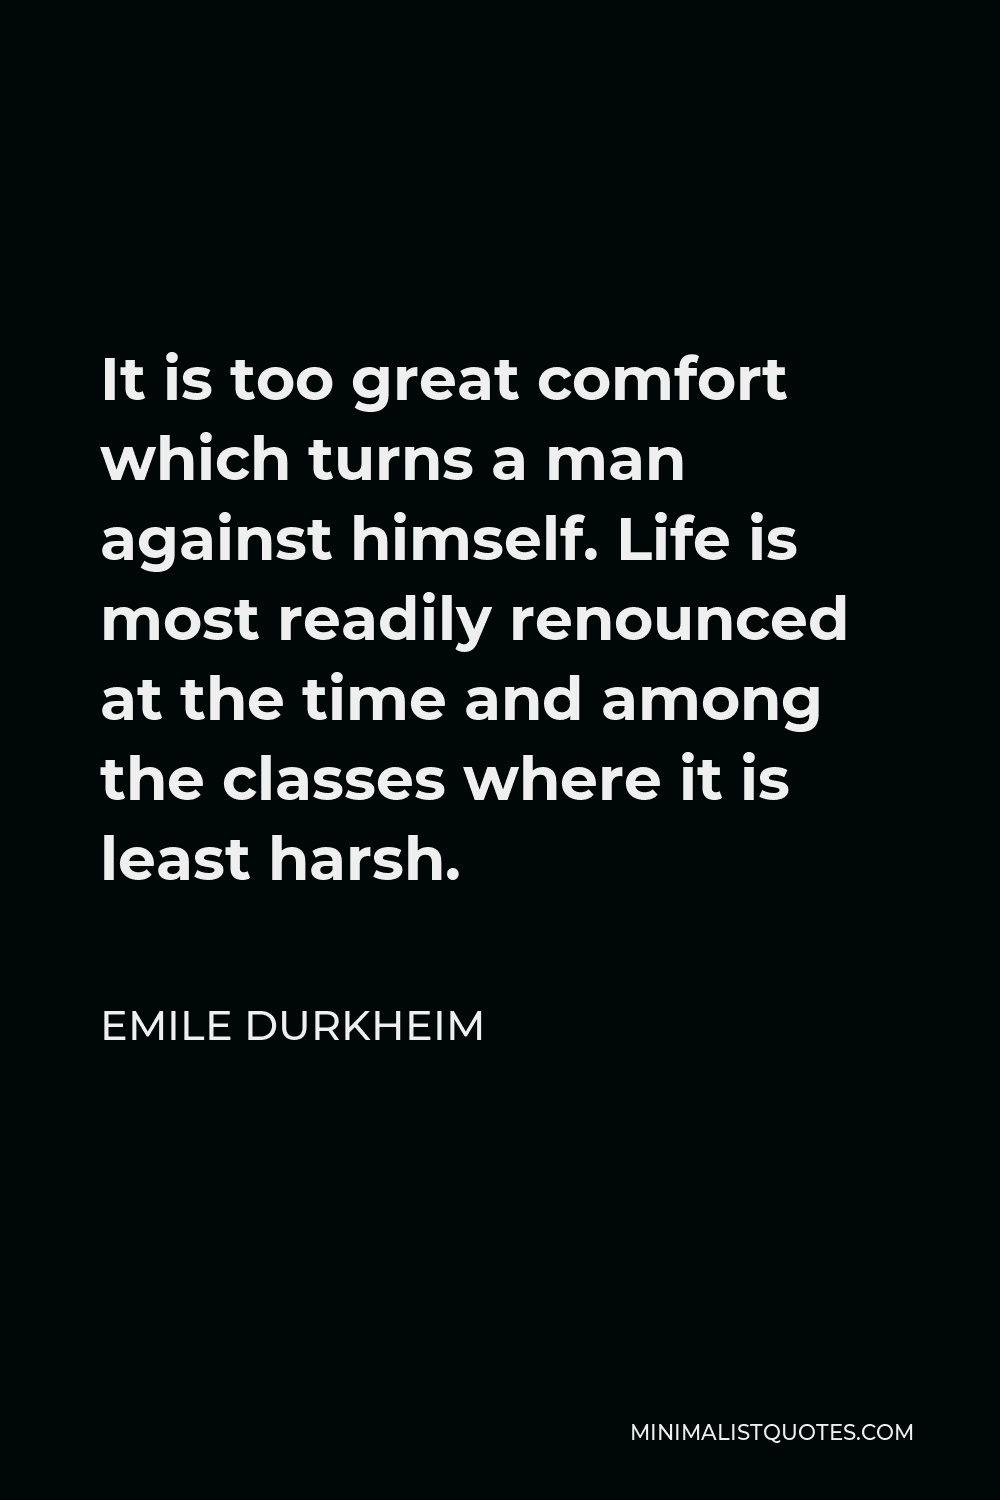 Emile Durkheim Quote - It is too great comfort which turns a man against himself. Life is most readily renounced at the time and among the classes where it is least harsh.